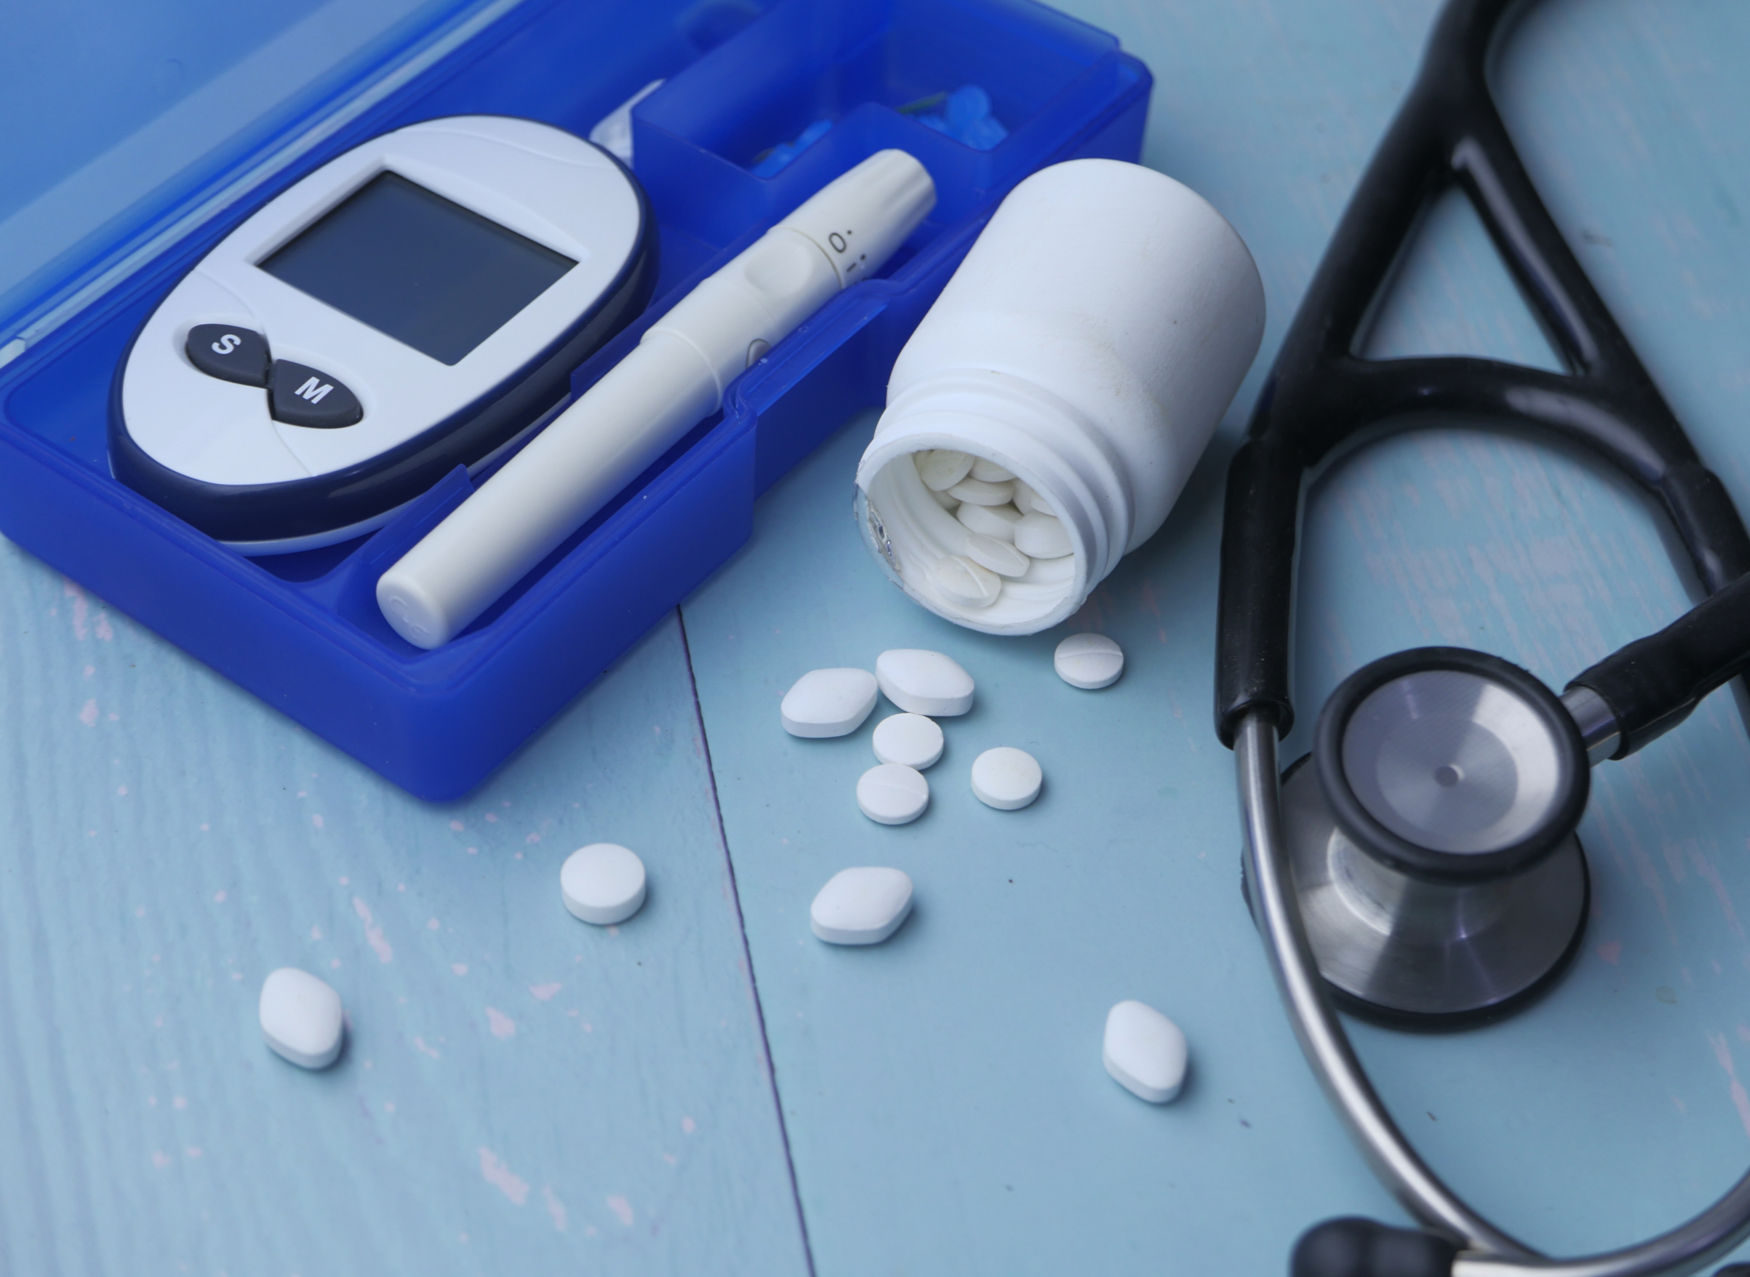 An open bottle of pills, a stethoscope, and a blood glucose meter sit next to each other on a tabletop